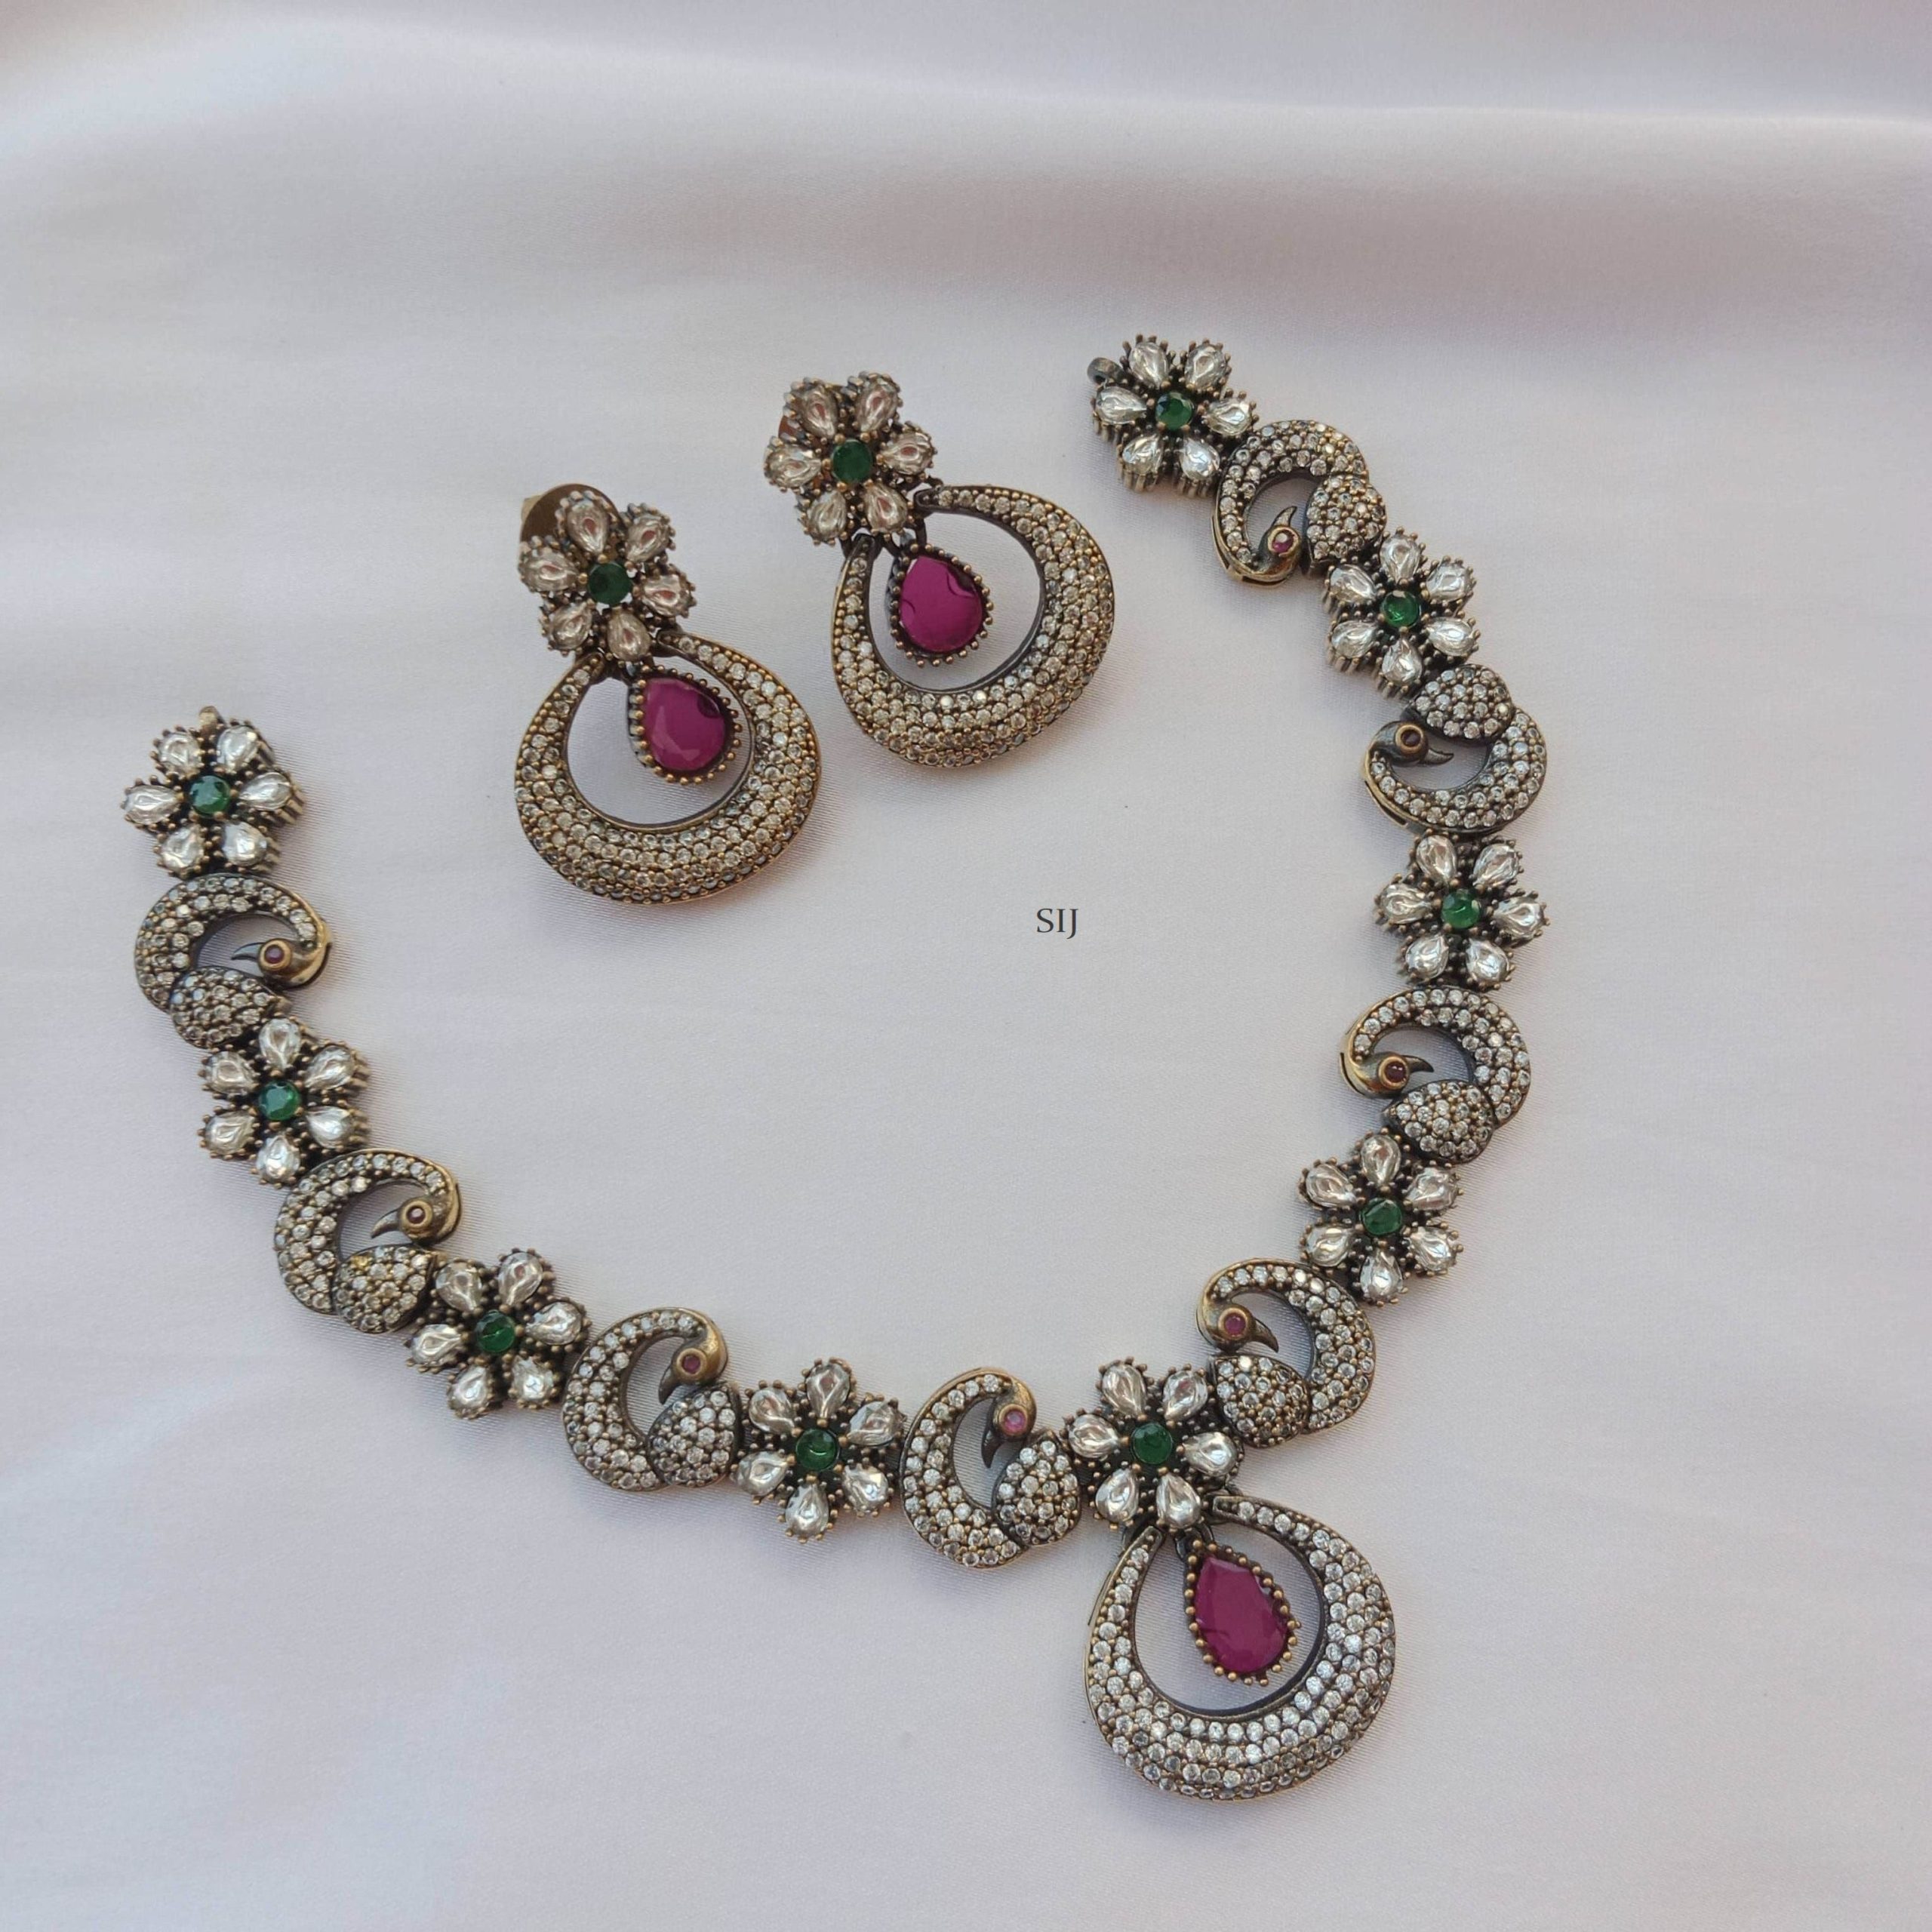 Gorgeous Peacock and Flower Victorian Necklace - South India Jewels